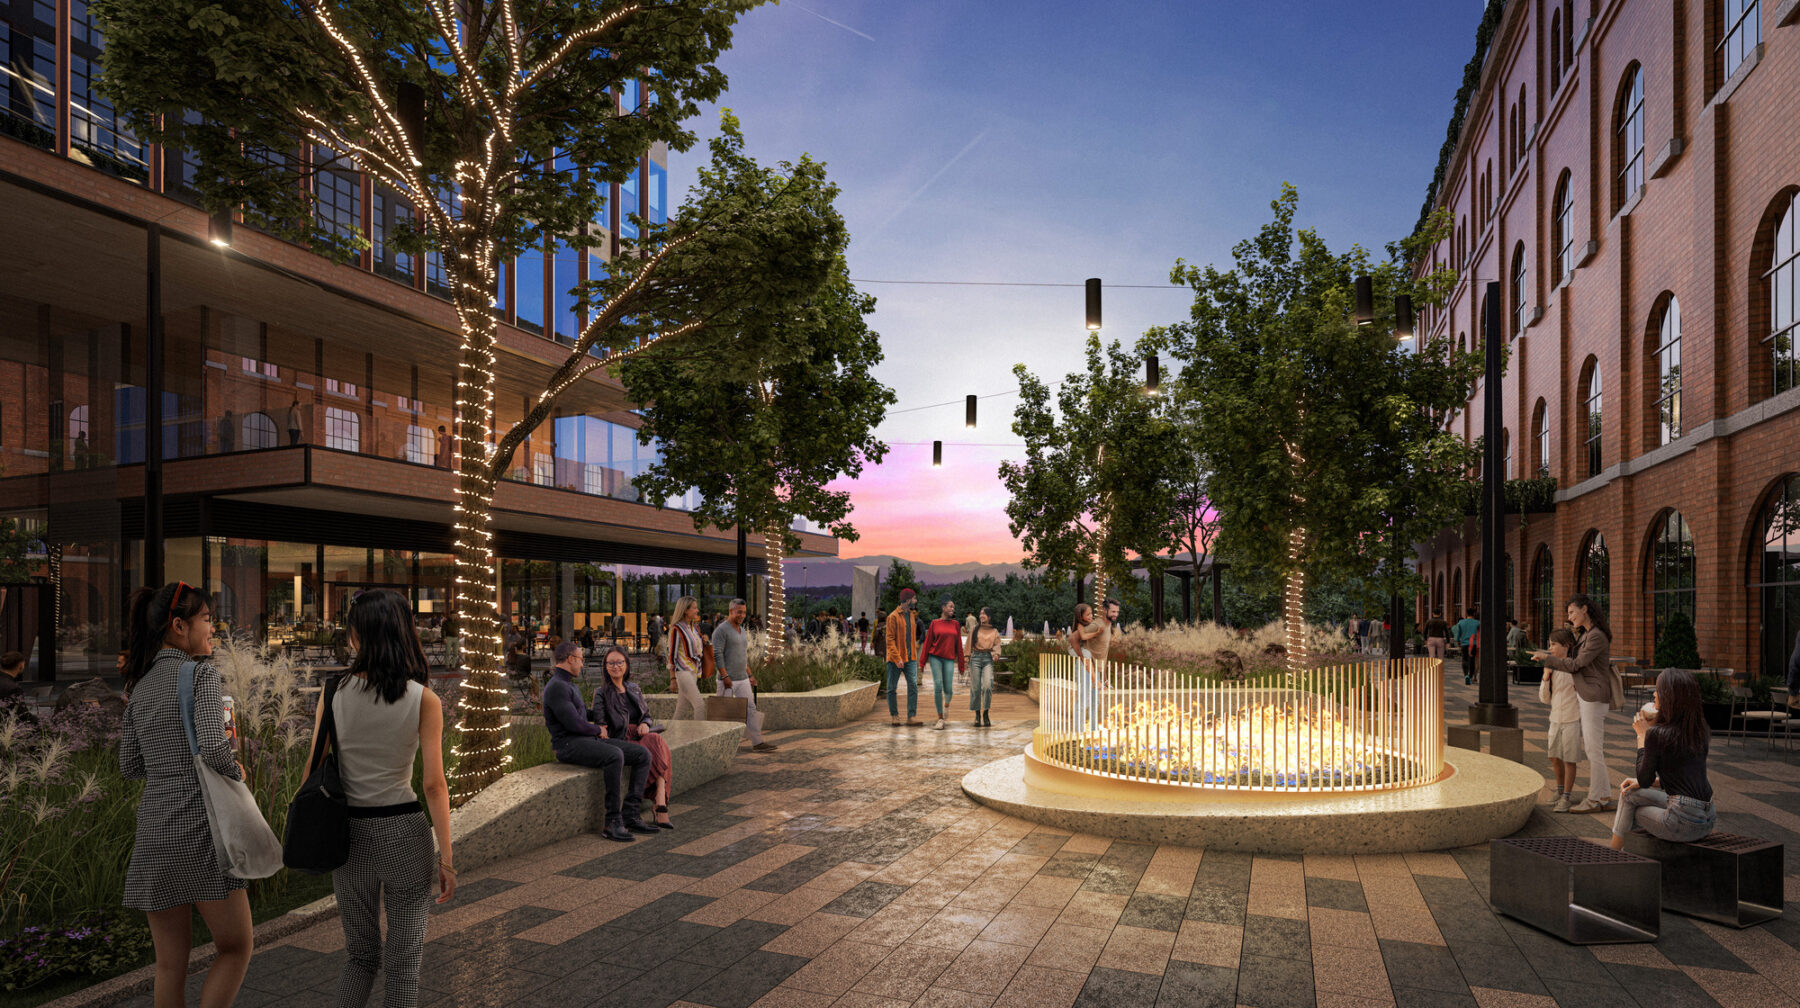 Rendering at dusk depicting the firepit situated between buildings with festive lights strung on trees and between buildings and pedestrians pausing to enjoy the warmth and light